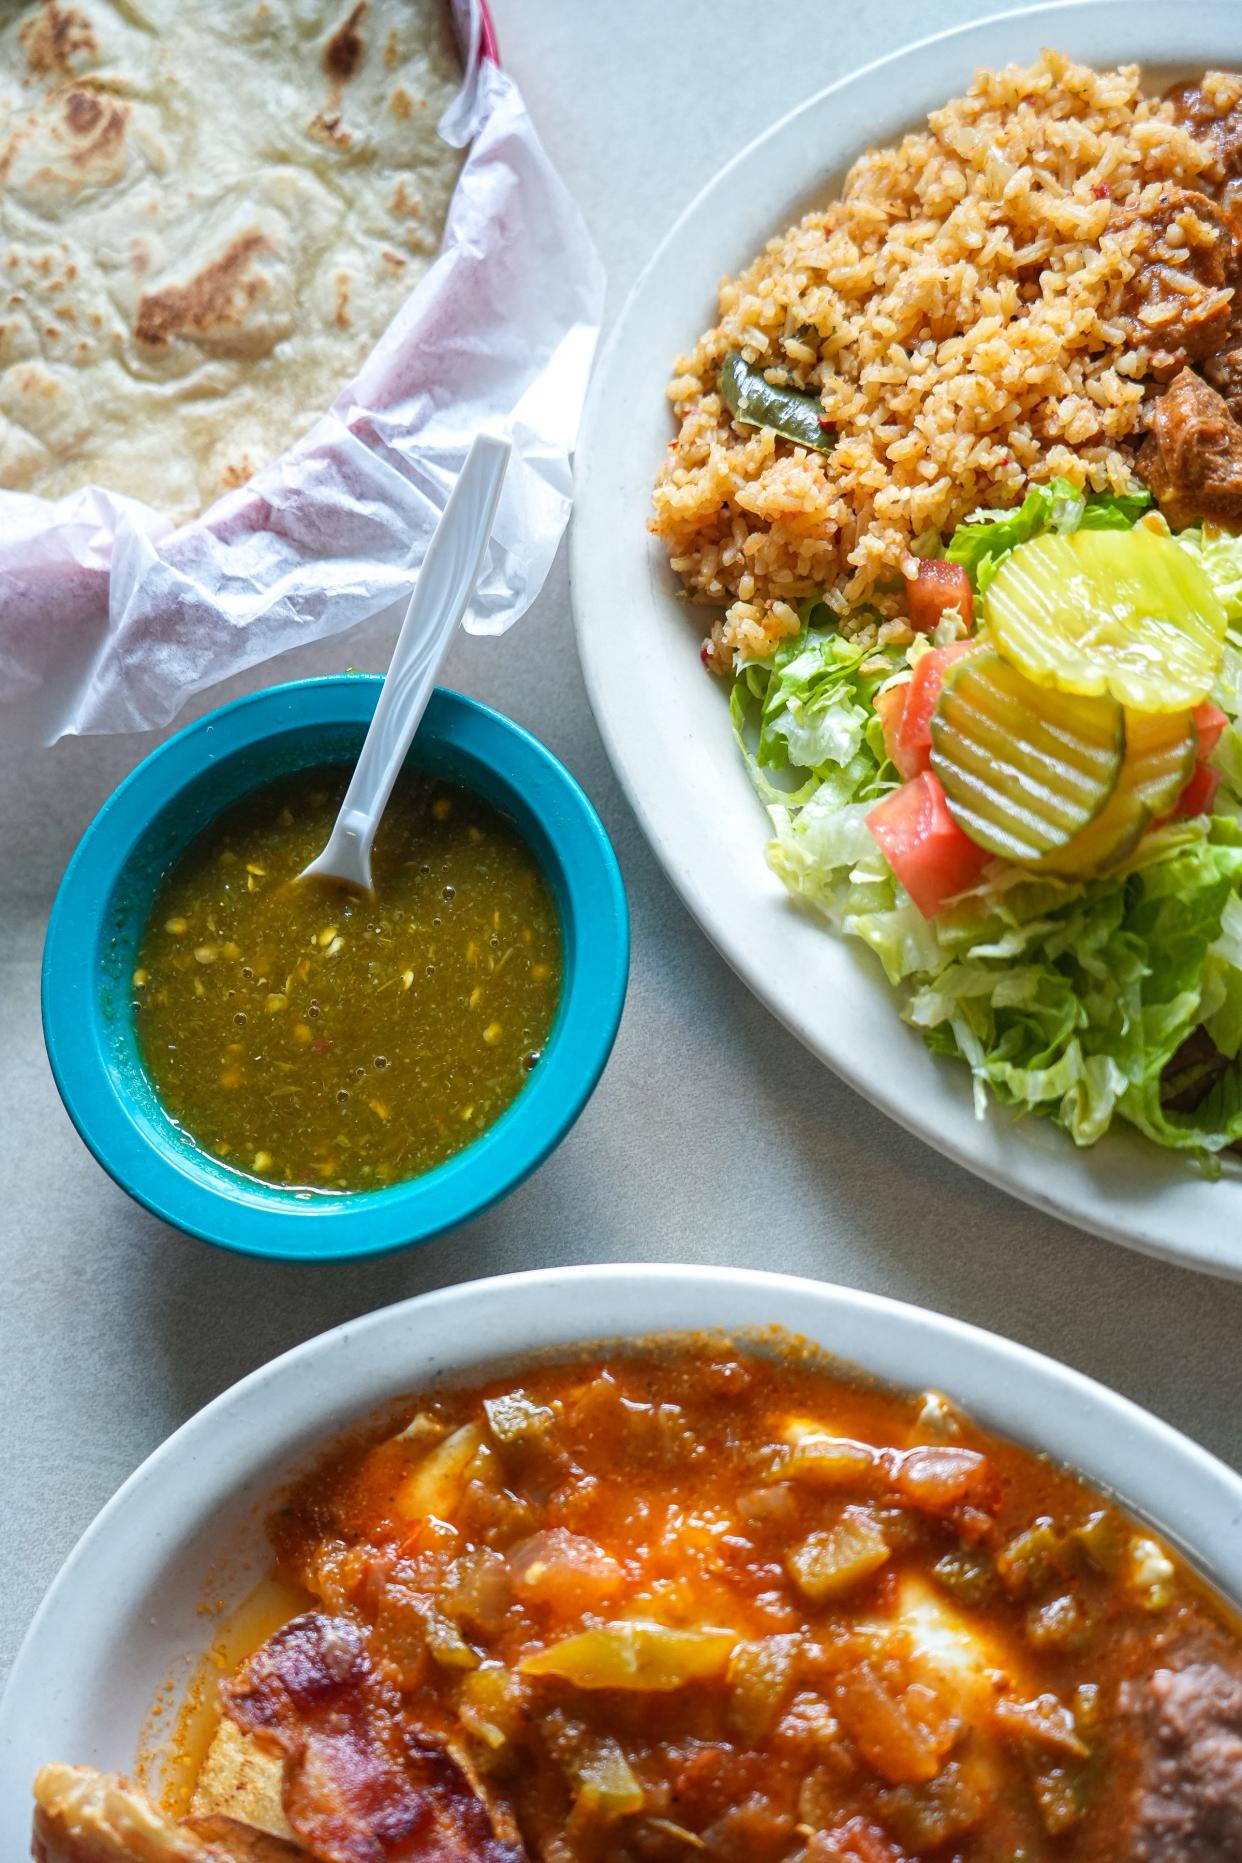 Dishes like huevos rancheros and carne guisada are staples at Joe's Bakery and Coffee, which opened in 1962.